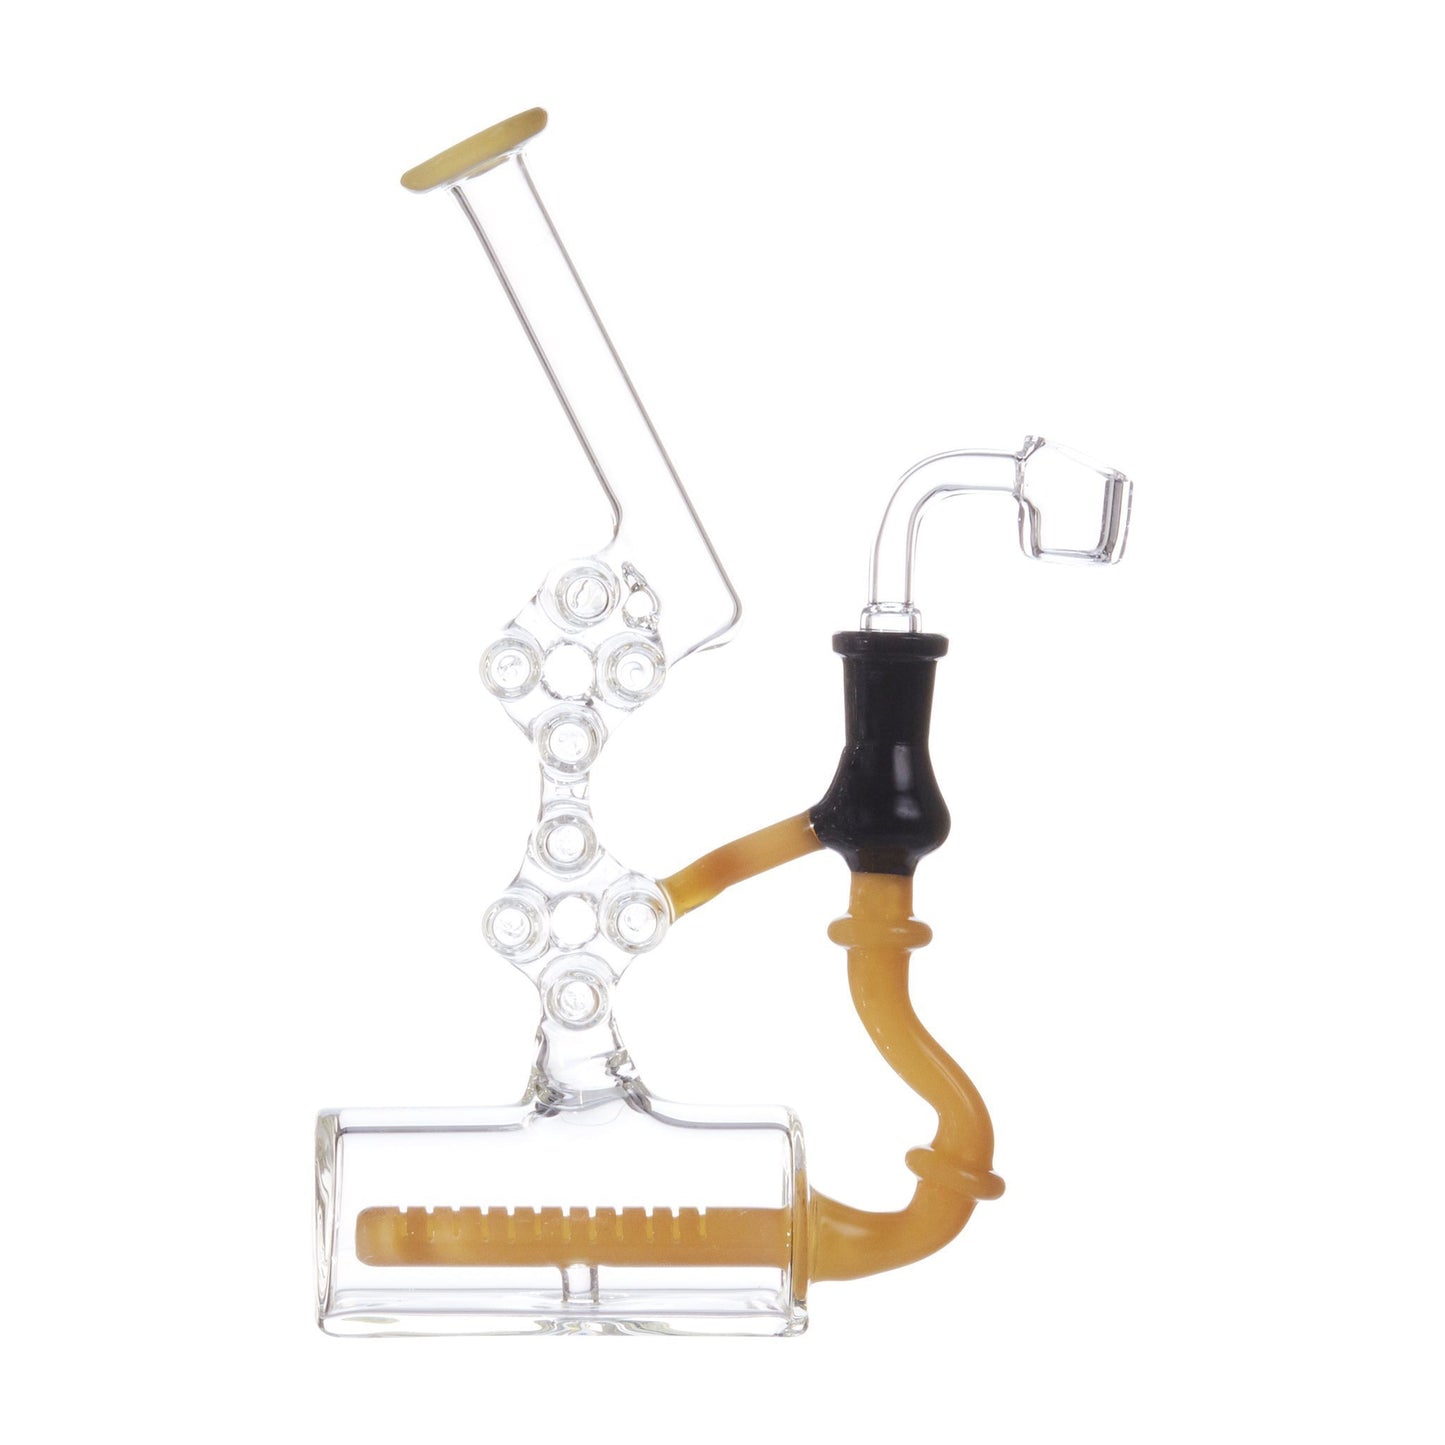 8-inch clear glass dab rig smoking device XL inline perc labyrinthine laboratory experiment design